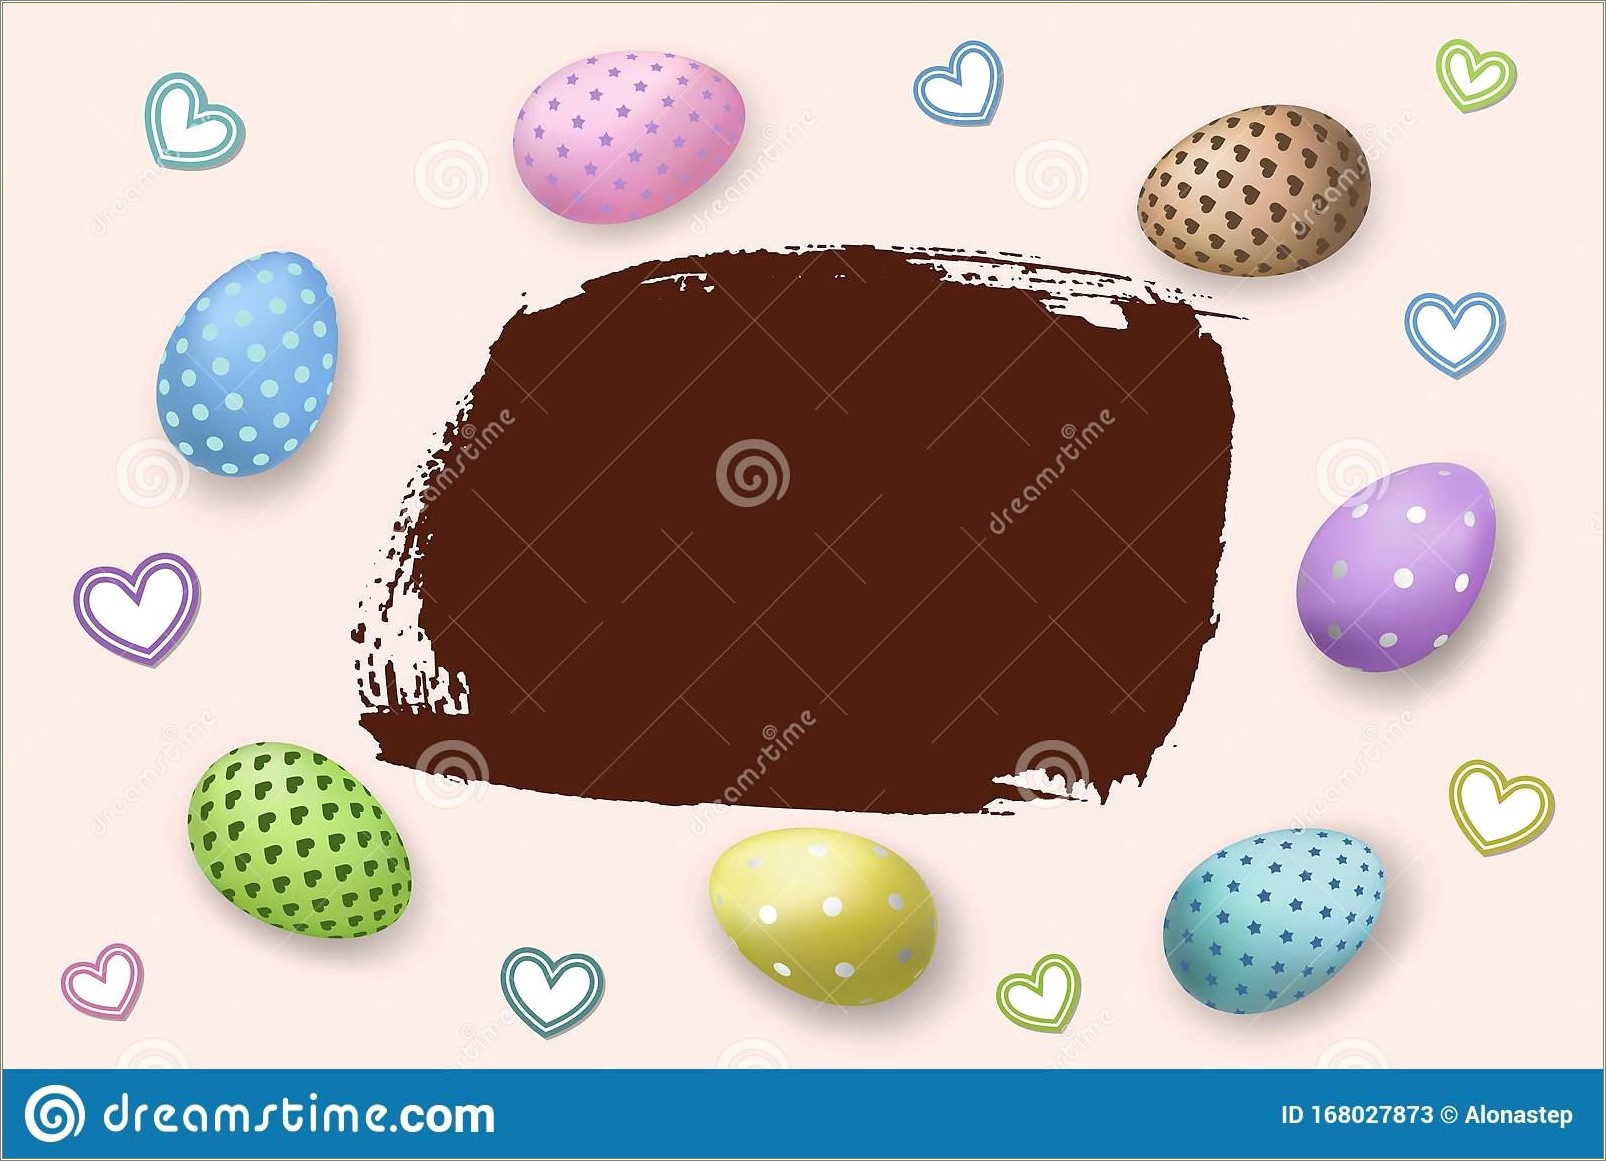 Free Blank Template For Easter Border Template Poster